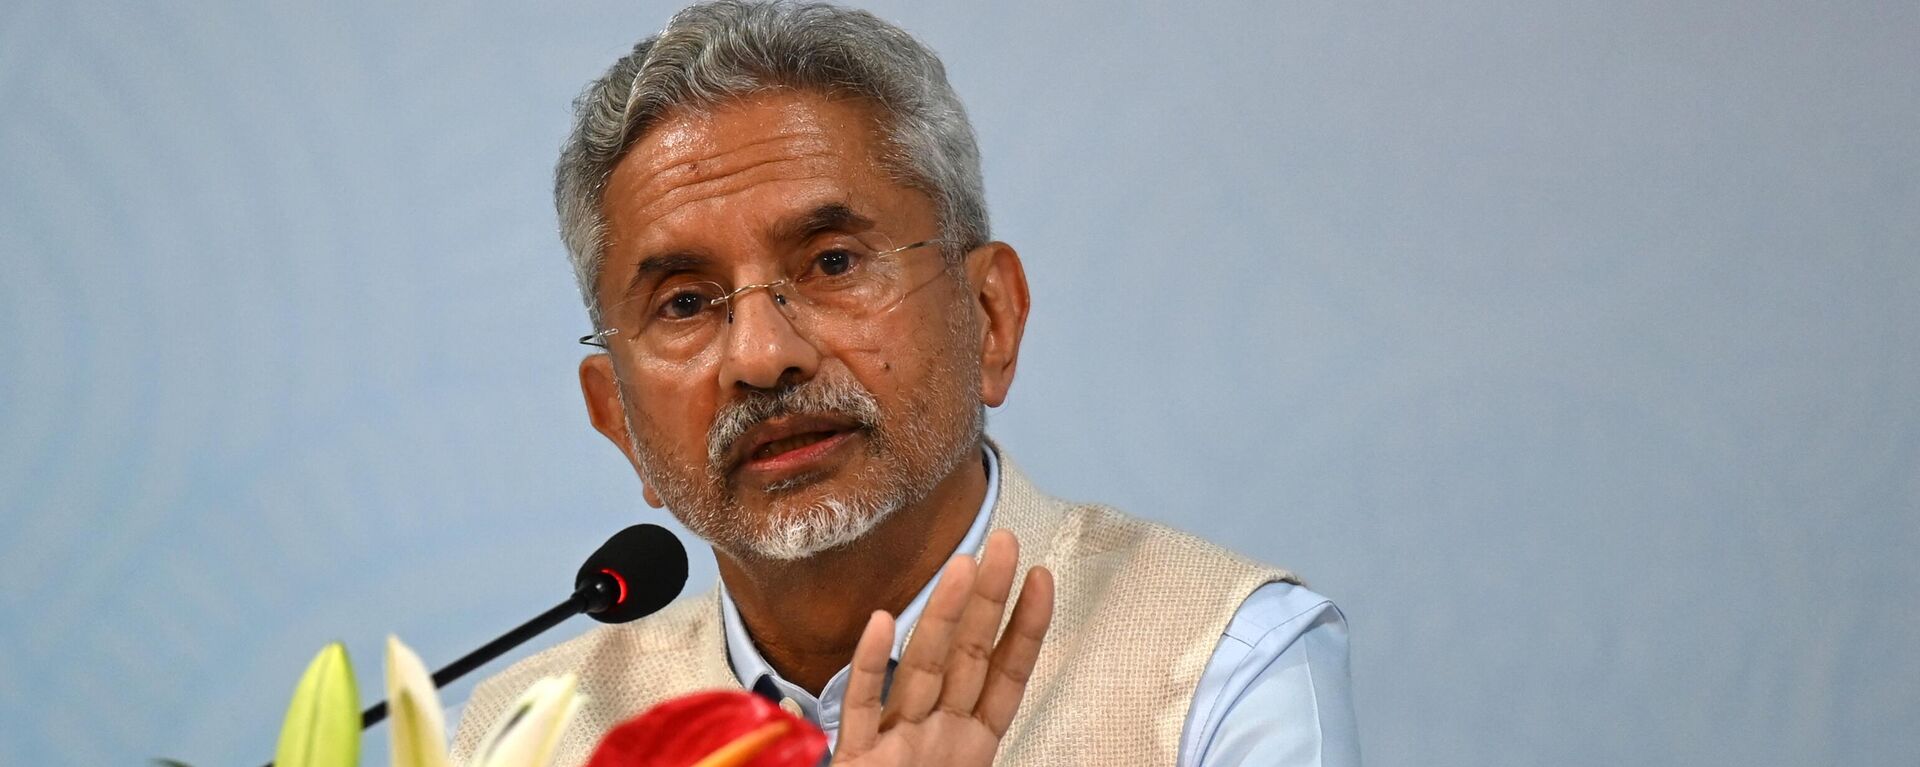 India's Foreign Minister Subrahmanyam Jaishankar gestures as he speaks during a news conference at the media centre for the Shanghai Cooperation Organization (SCO) meeting in Benaulim on May 5, 2023. (Photo by Punit PARANJPE / AFP) - Sputnik भारत, 1920, 17.12.2023